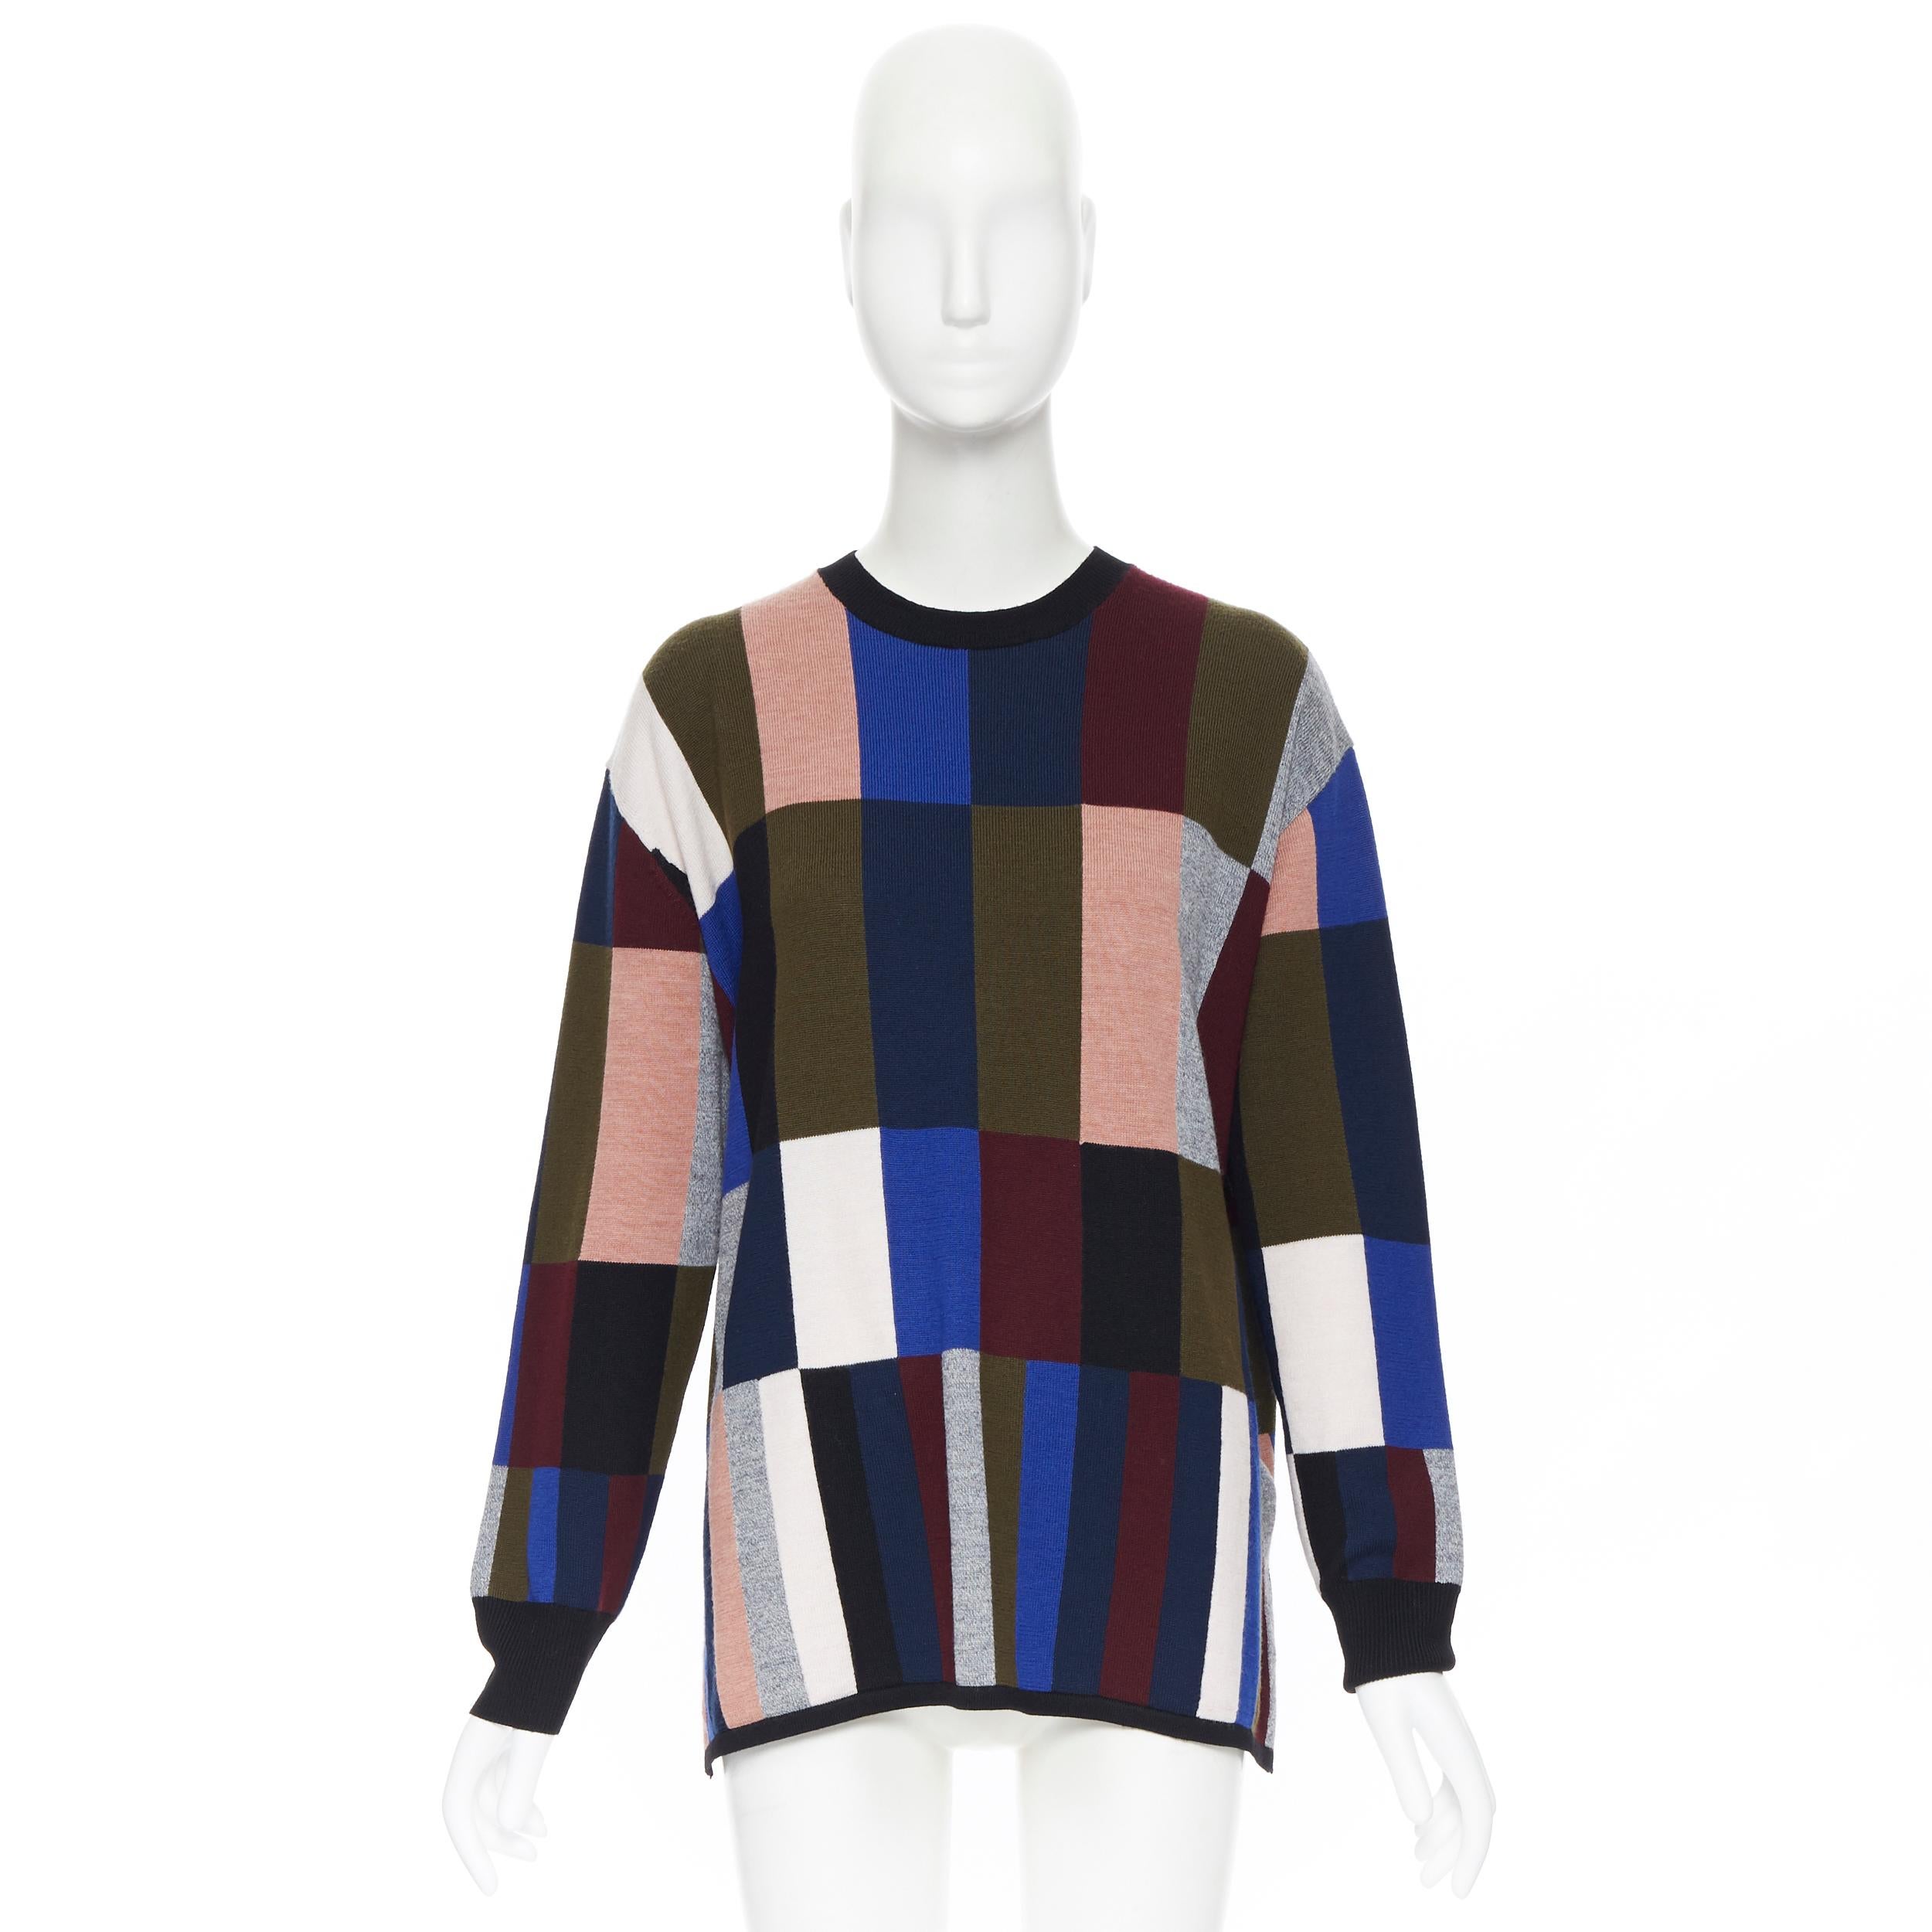 new VVB VICTORIA BECKHAM 100% wool graphic colorblocked oversized sweater UK8
Brand: Victoria Beckham
Designer: Victoria Beckham
Collection: Fall Winter 2018
Model Name / Style: Colorblocked sweater
Material: Wool
Color: Multicolour
Pattern: